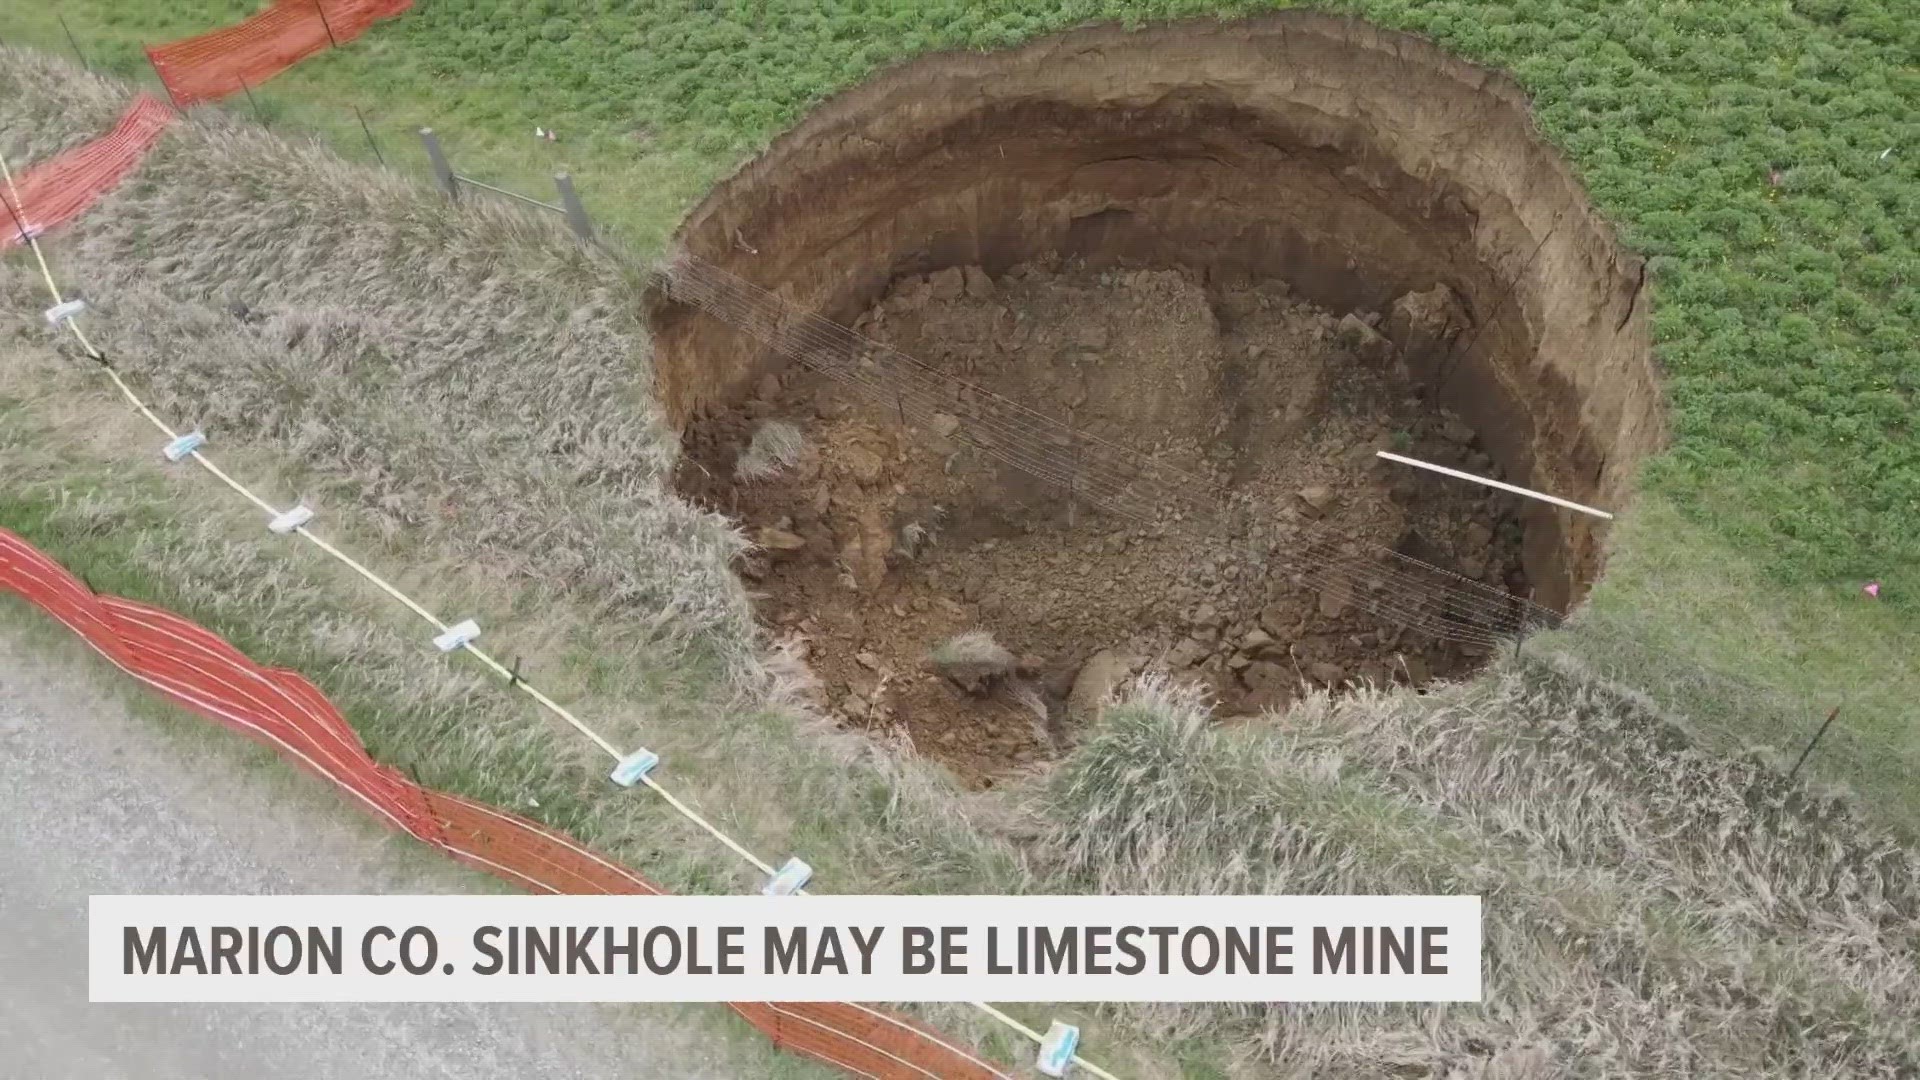 After an investigation, Marion County has discovered that the sinkhole was not formed by an abandoned coal mine like they originally thought.